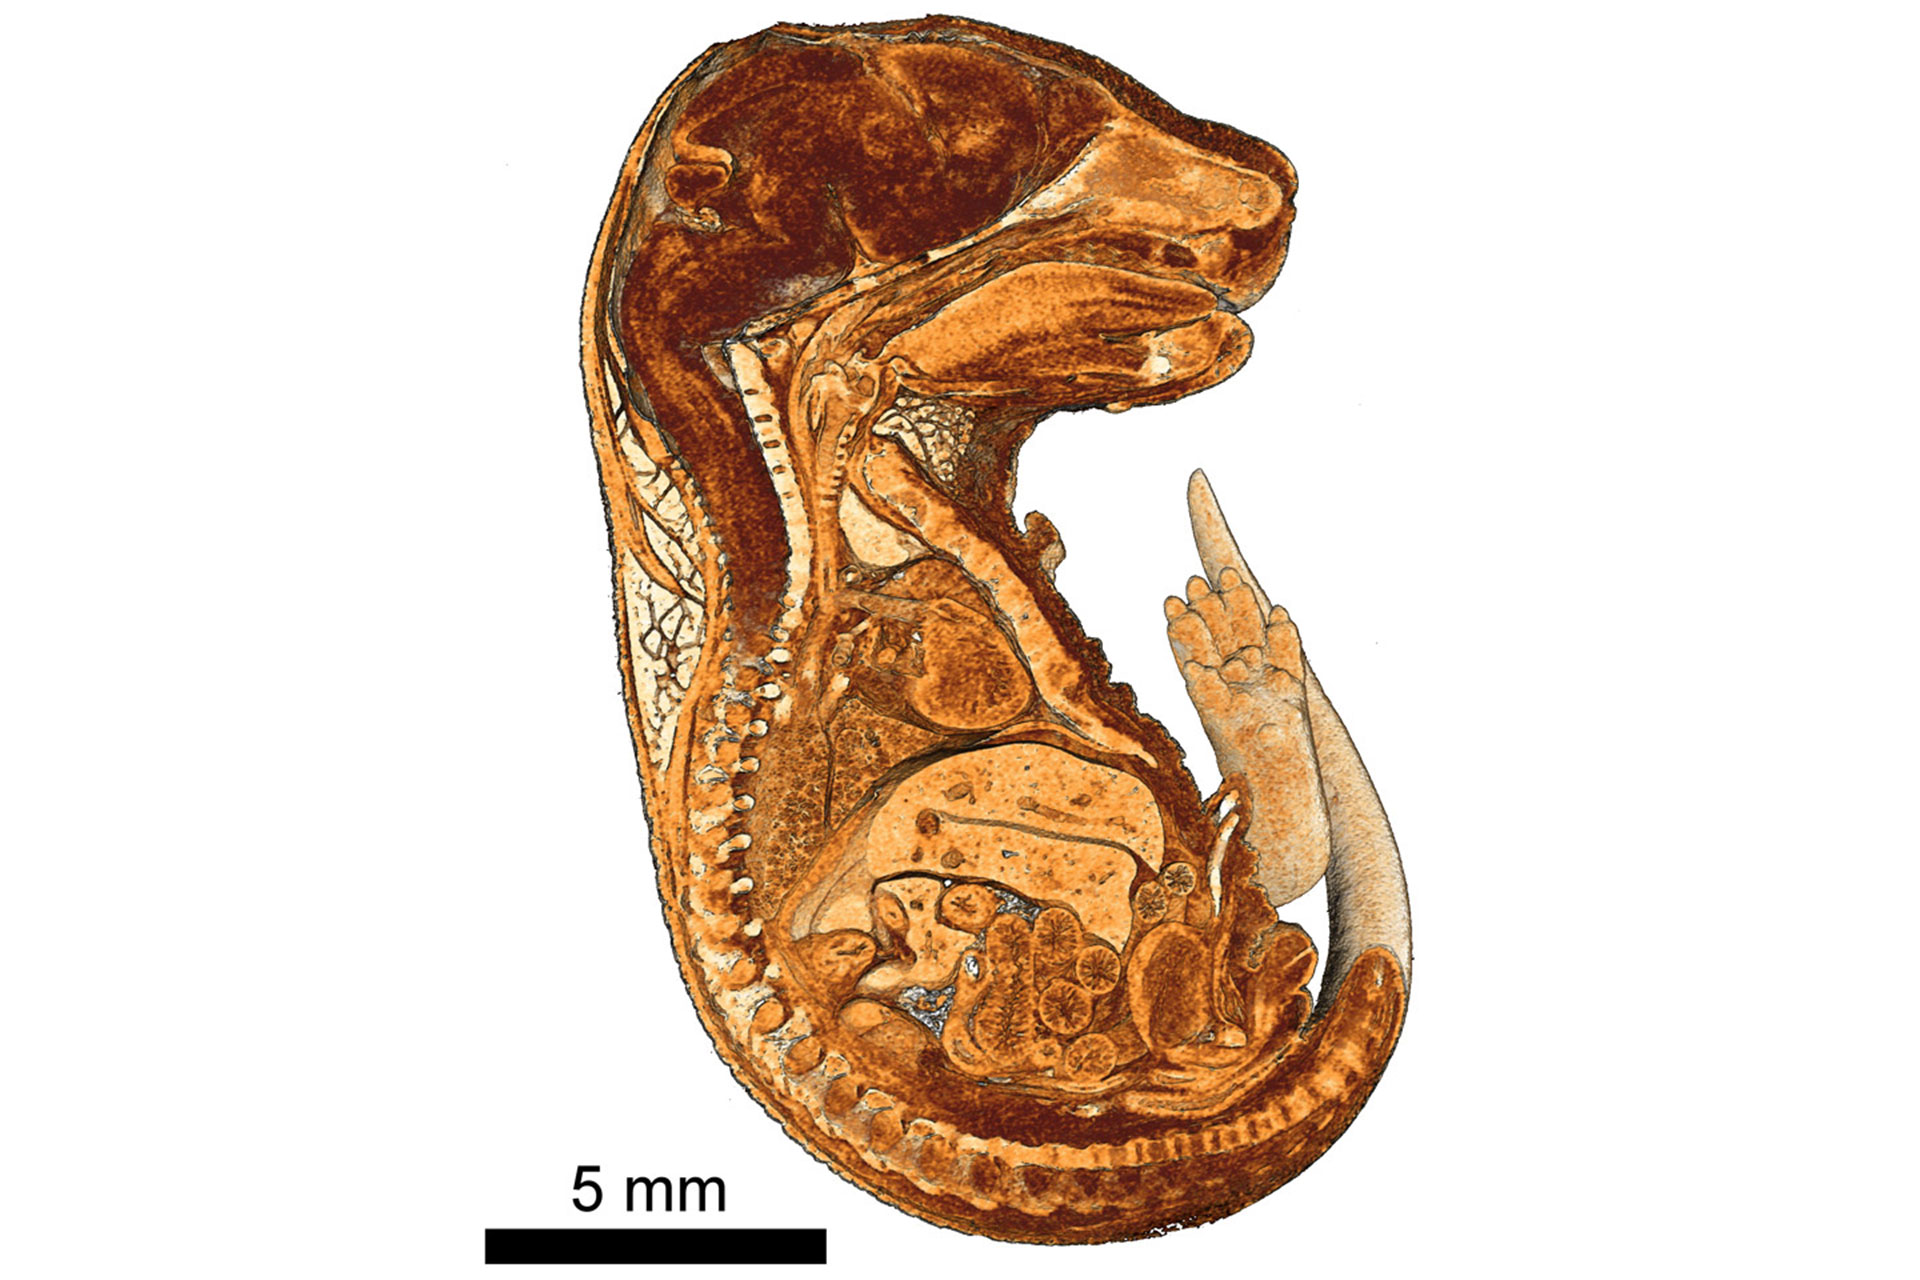 Cutaway view of 3D rendering of a mouse embryo embedded in paraffin